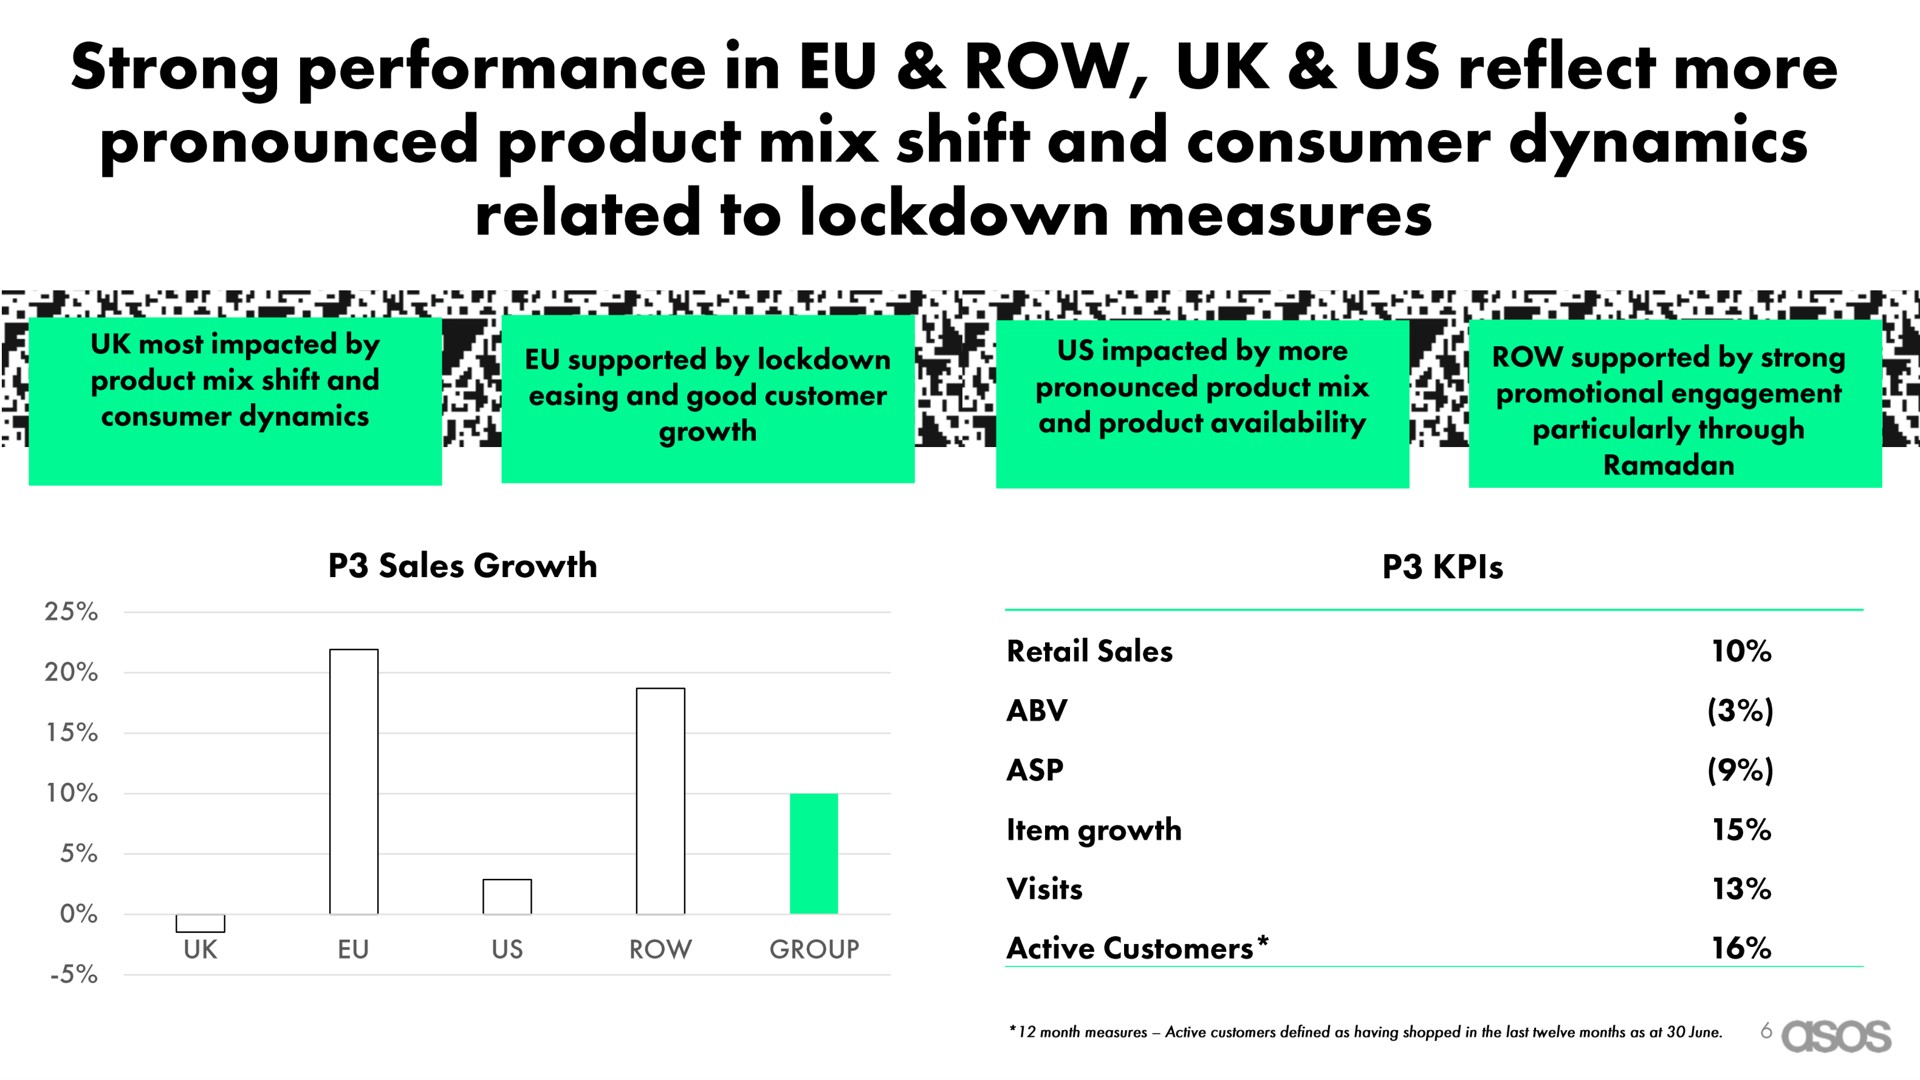 strong performance in row us reflect more pronounced product mix shift and consumer dynamics related to measures | Asos